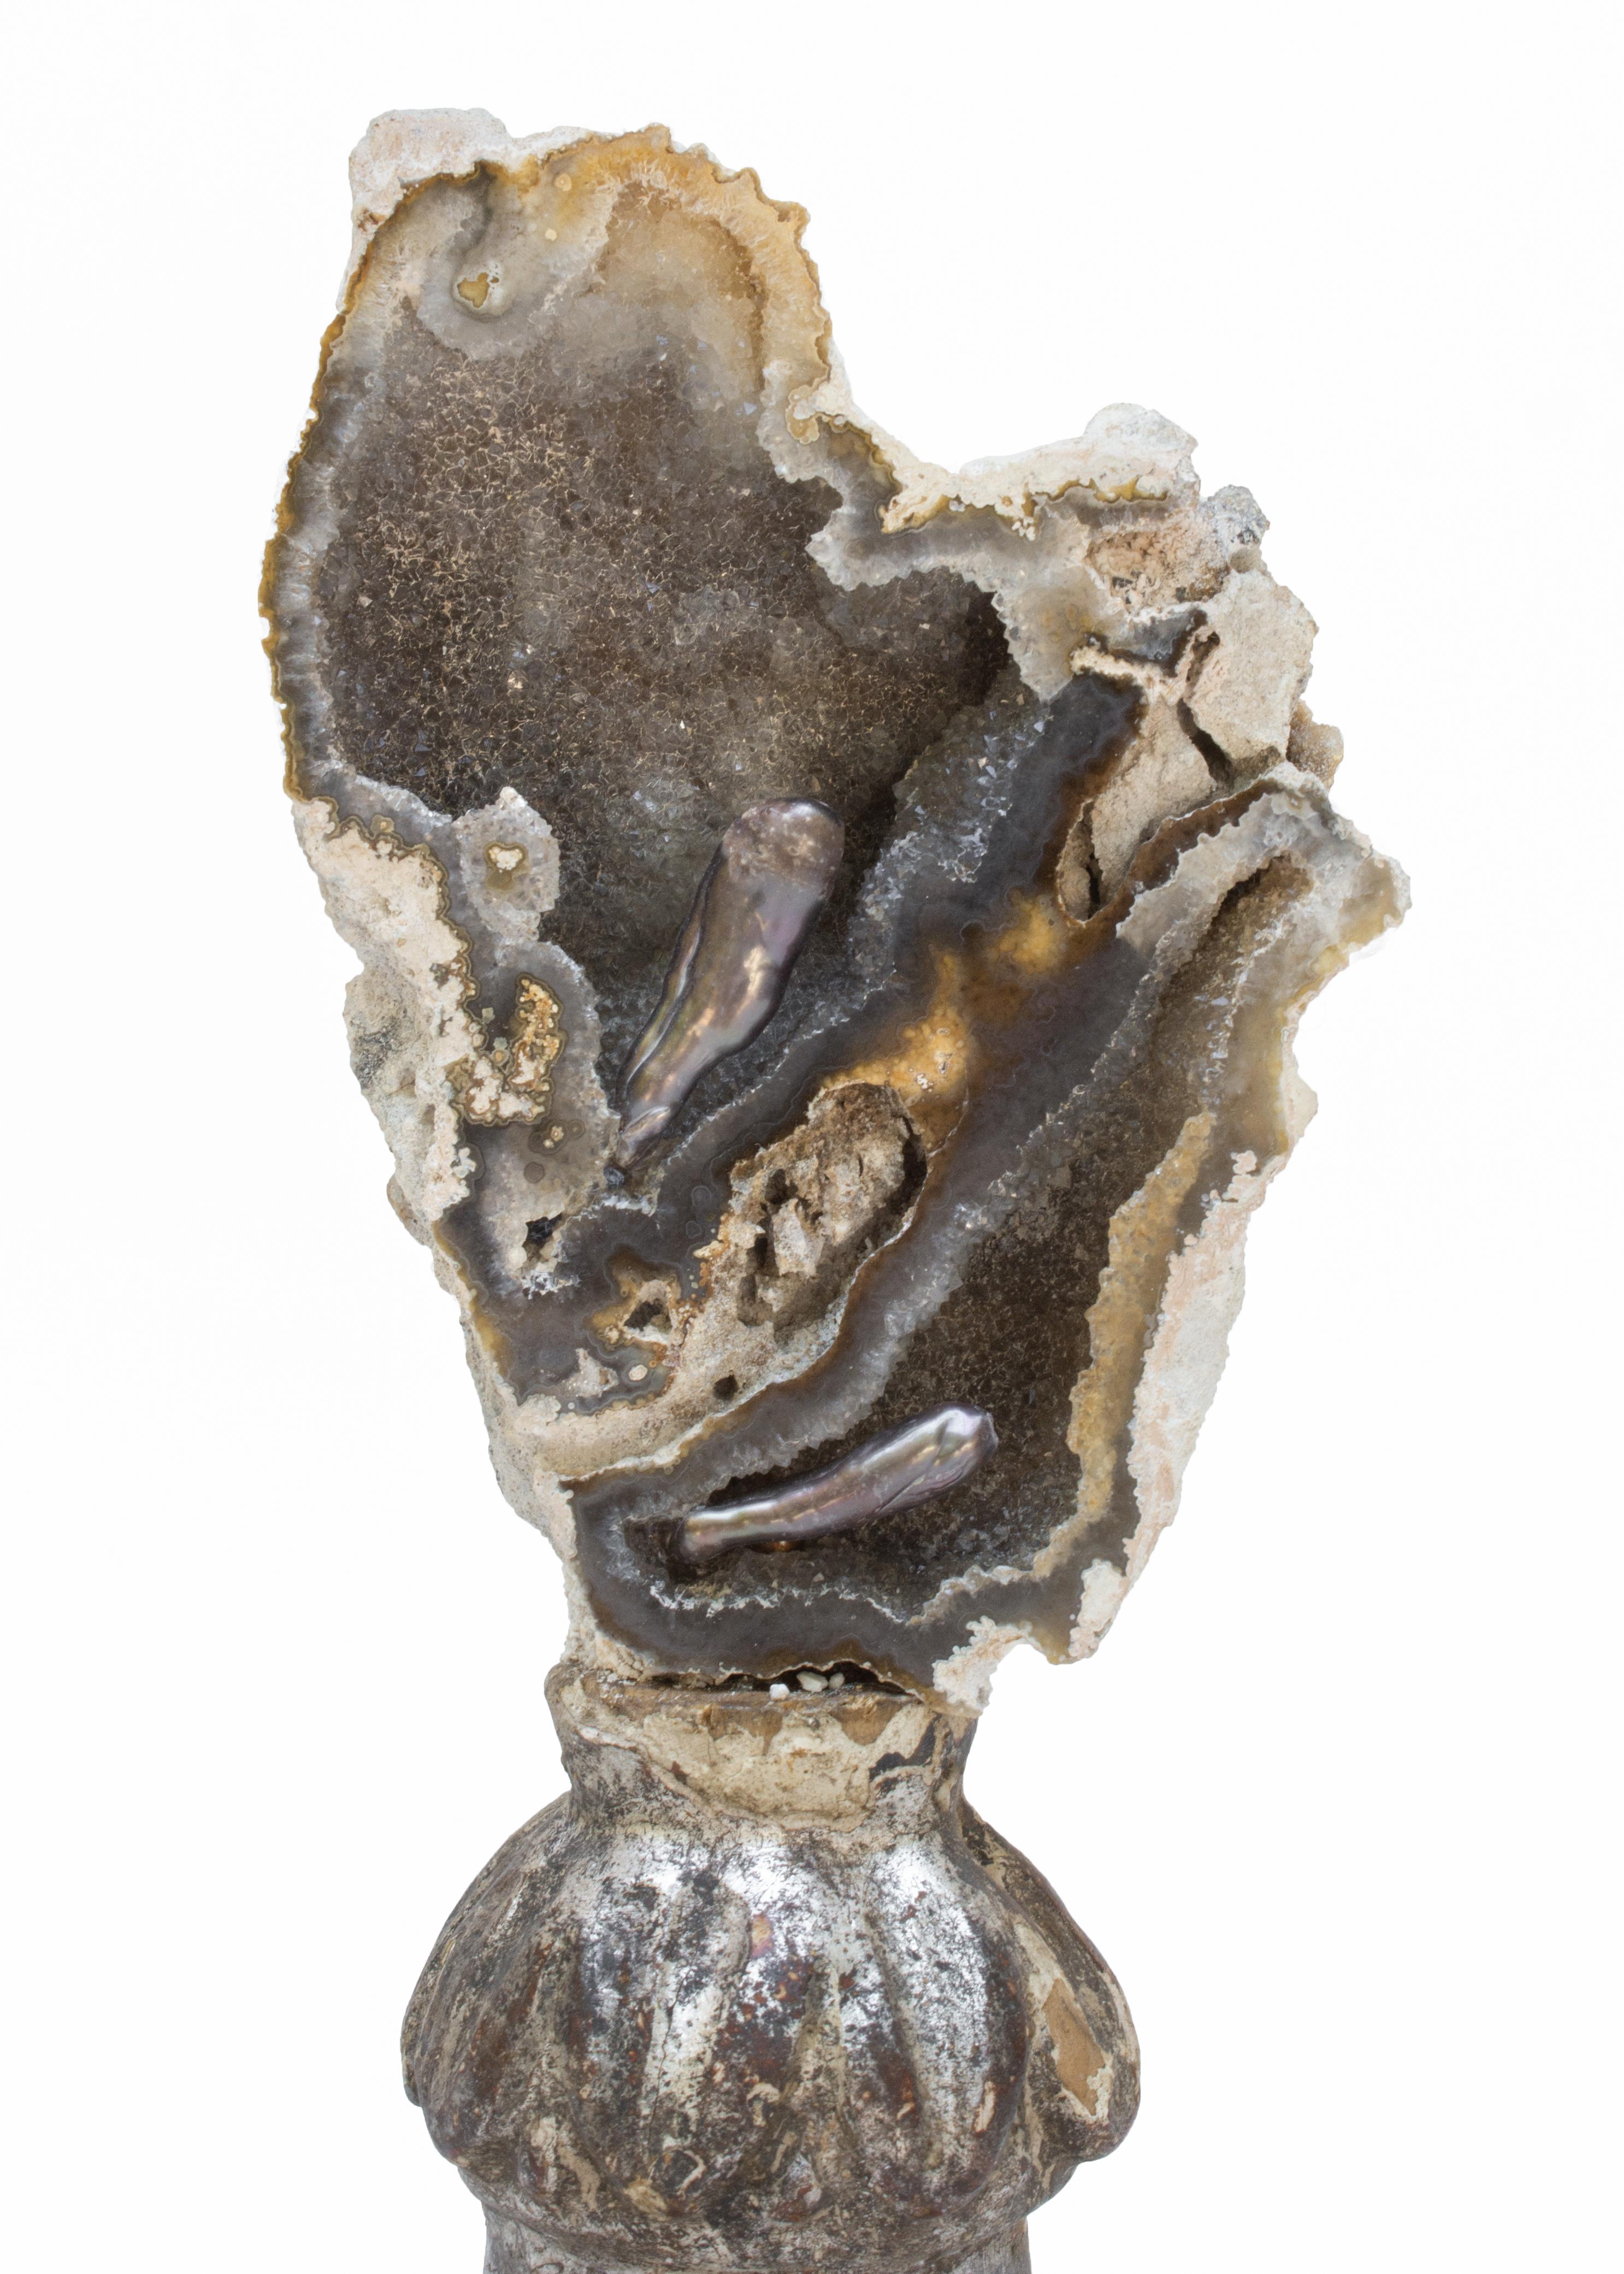 18th century Italian silver leaf candlestick top with polished fossil agatized coral and natural forming Baroque pearls with coordinating seed pearls on the base of the candlestick. It sits on an antique Italian drip tray base. The candlestick is